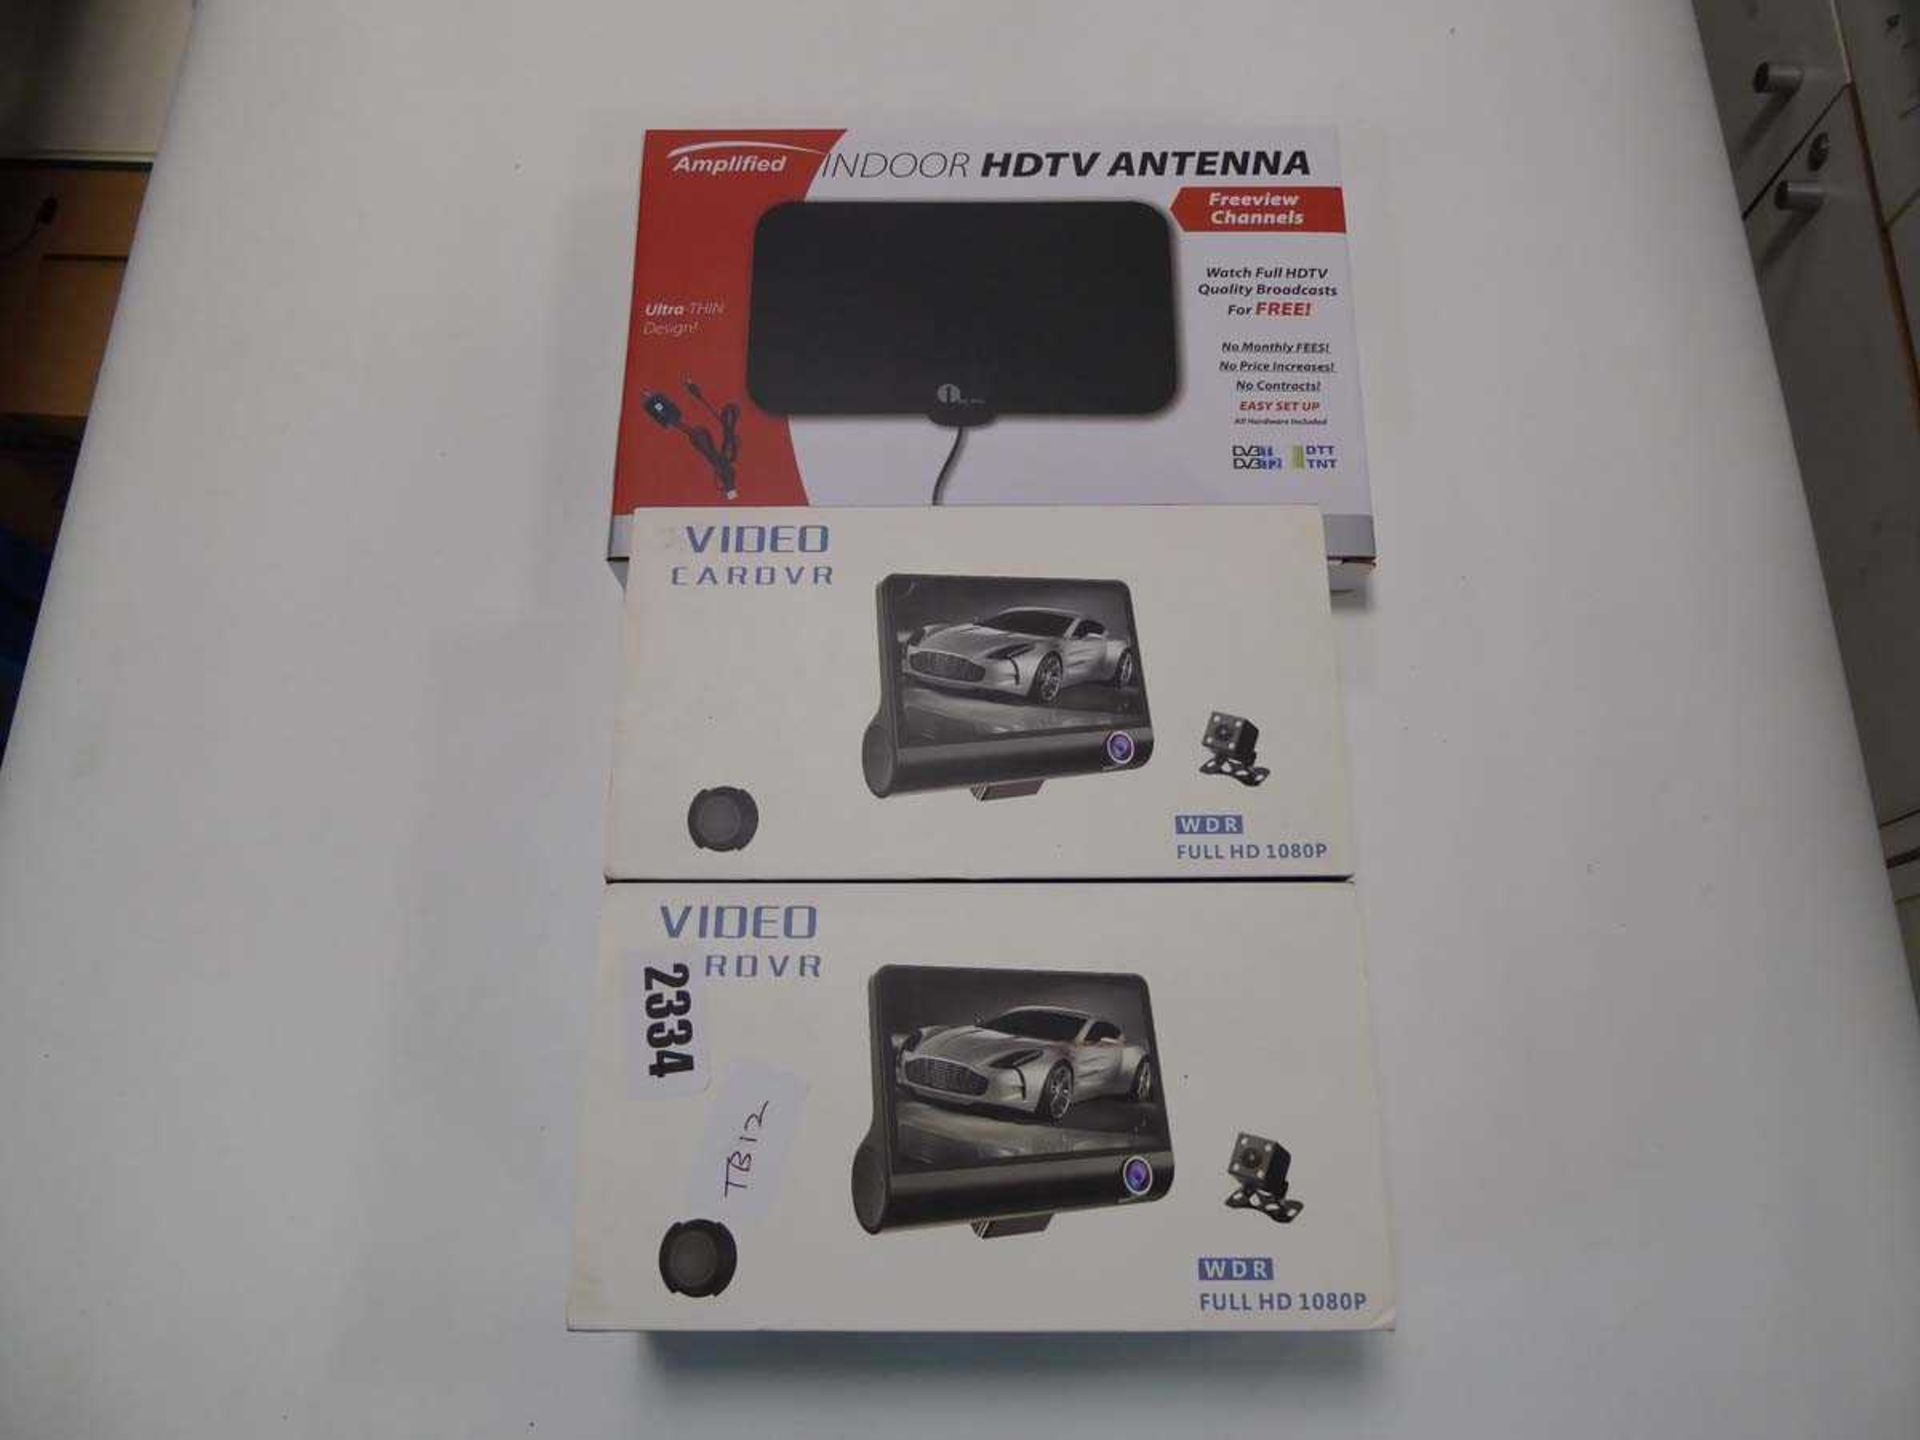 2 x Video car DVR with HD, and an amplified indoor HDTV antenna